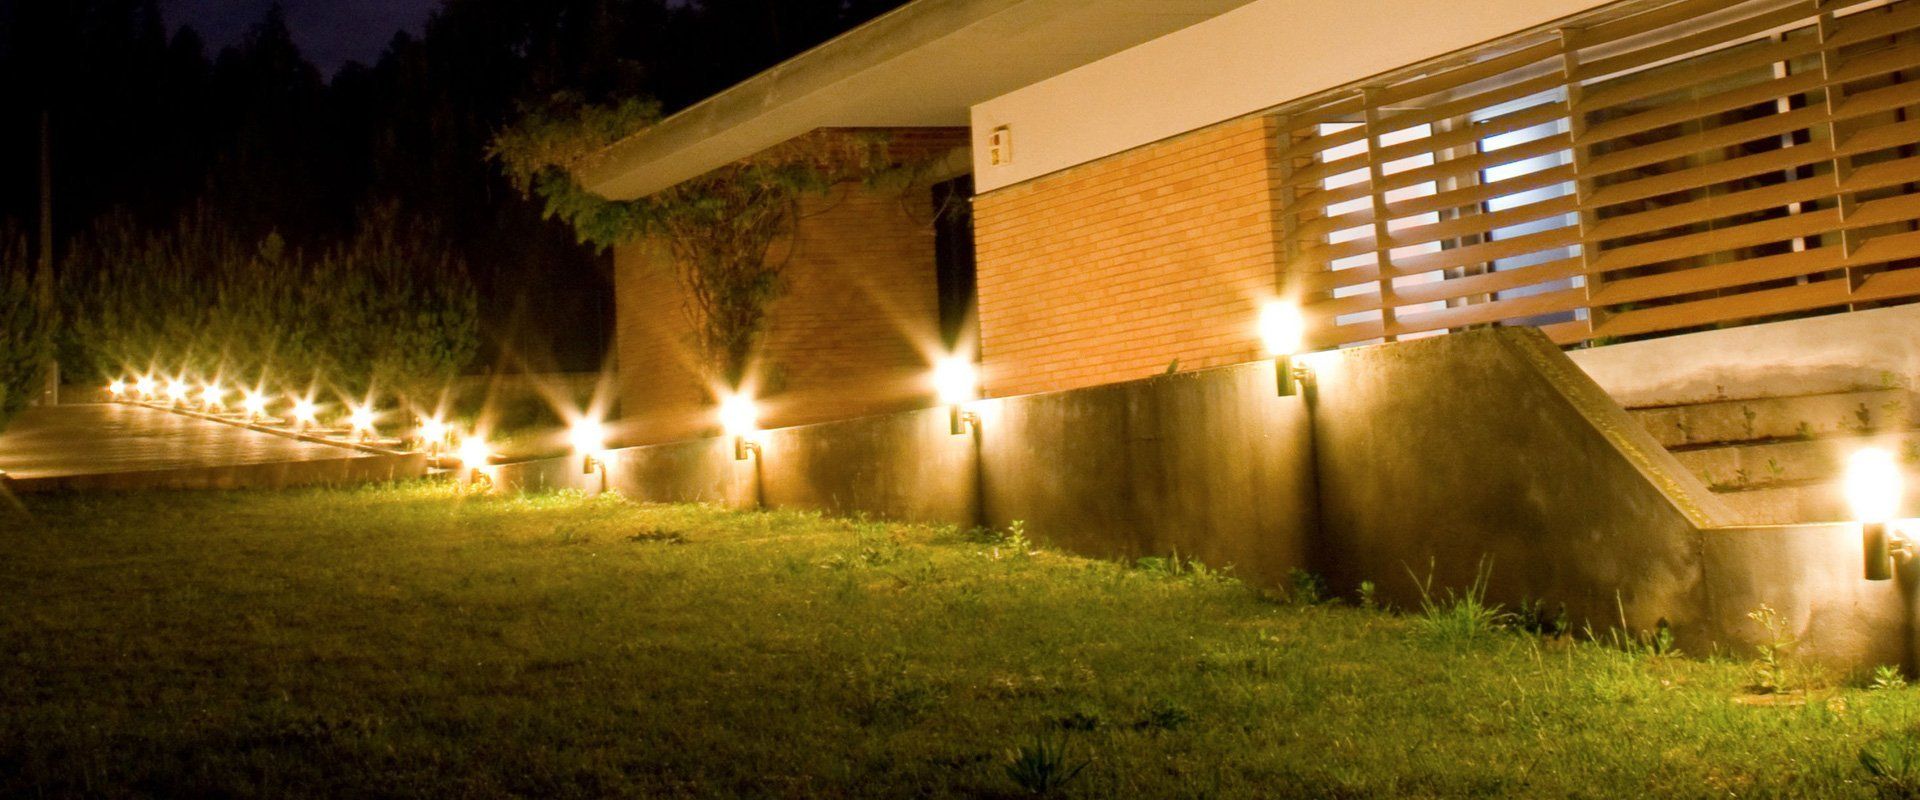 Outdoor residential lights